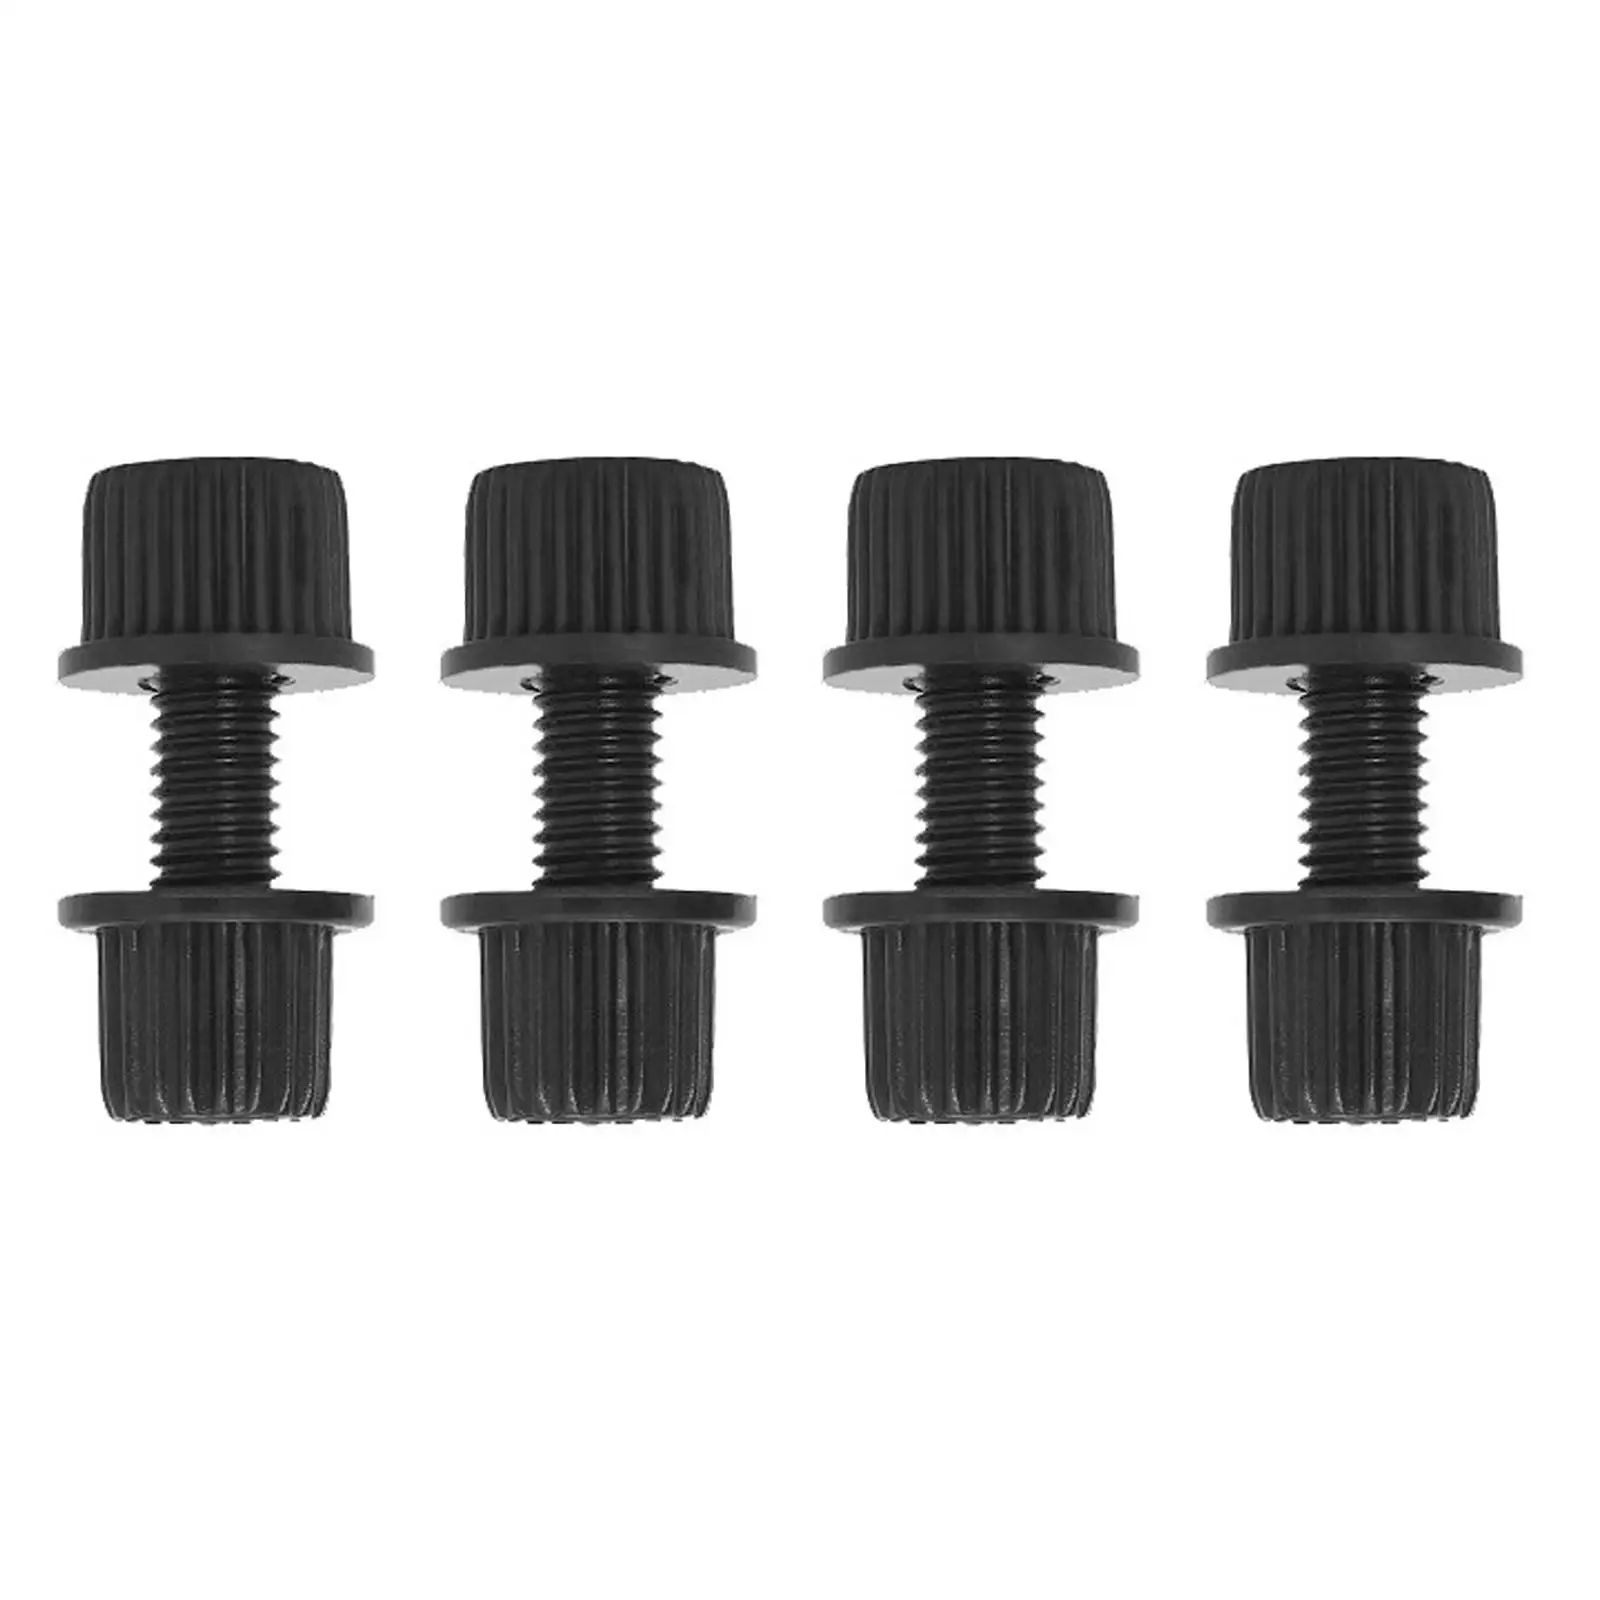 4 x Motorcycle License Plate Frame Screws Kit Anti Rust Rust Proof Fastenings Screws for Yacht License Plate Easy Installation